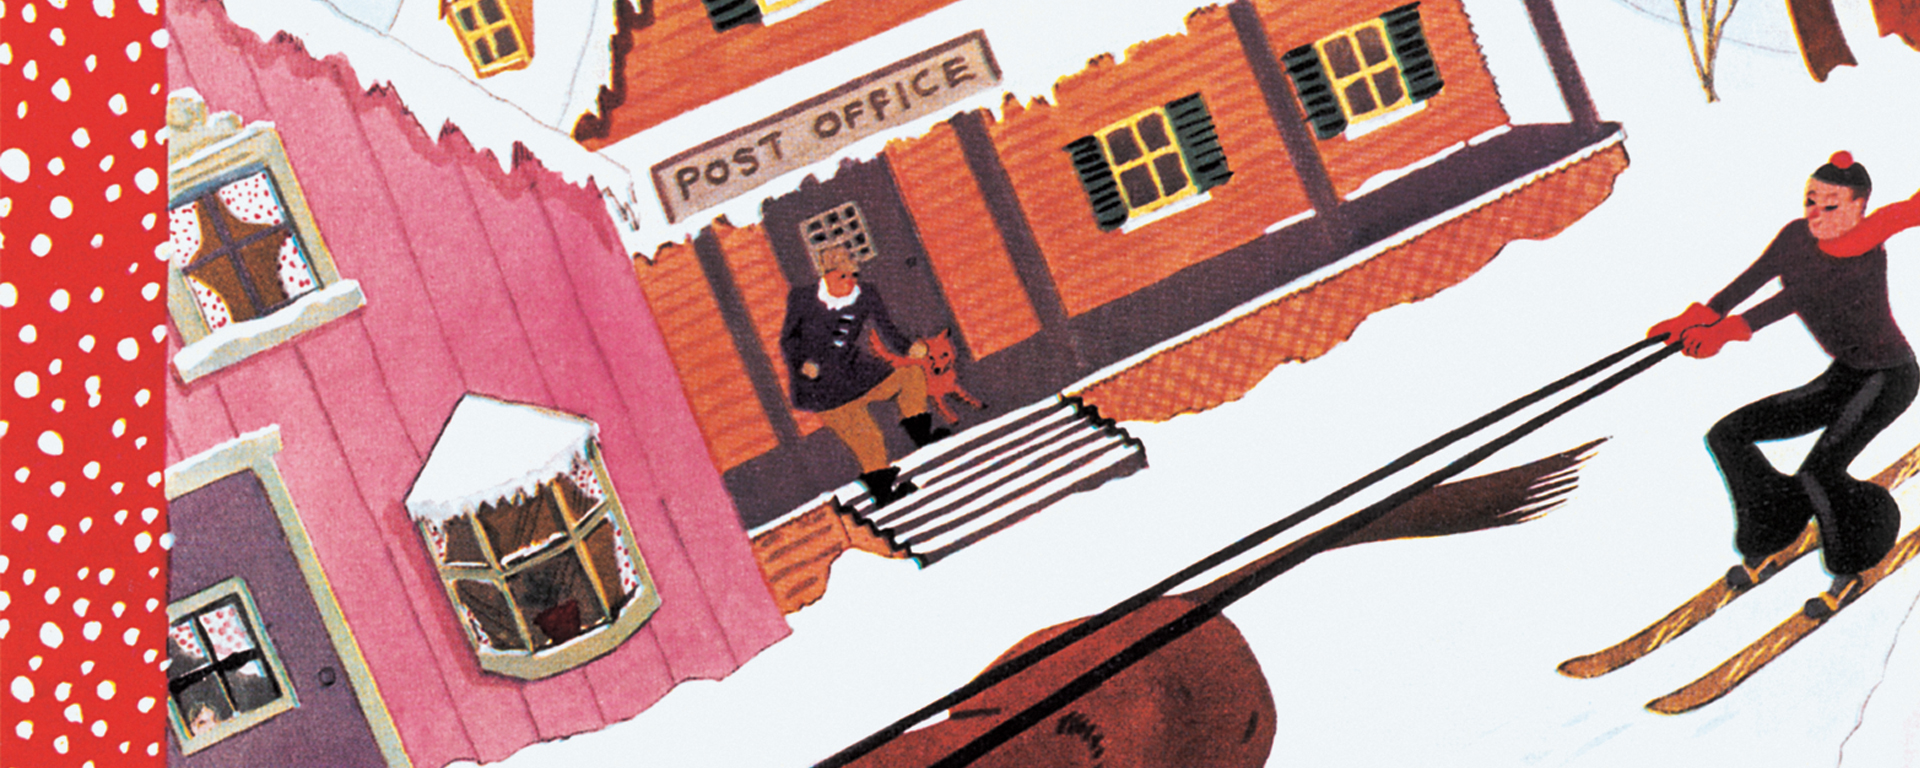 new yorker cover art of horse pulling skier through winter town in front of post office